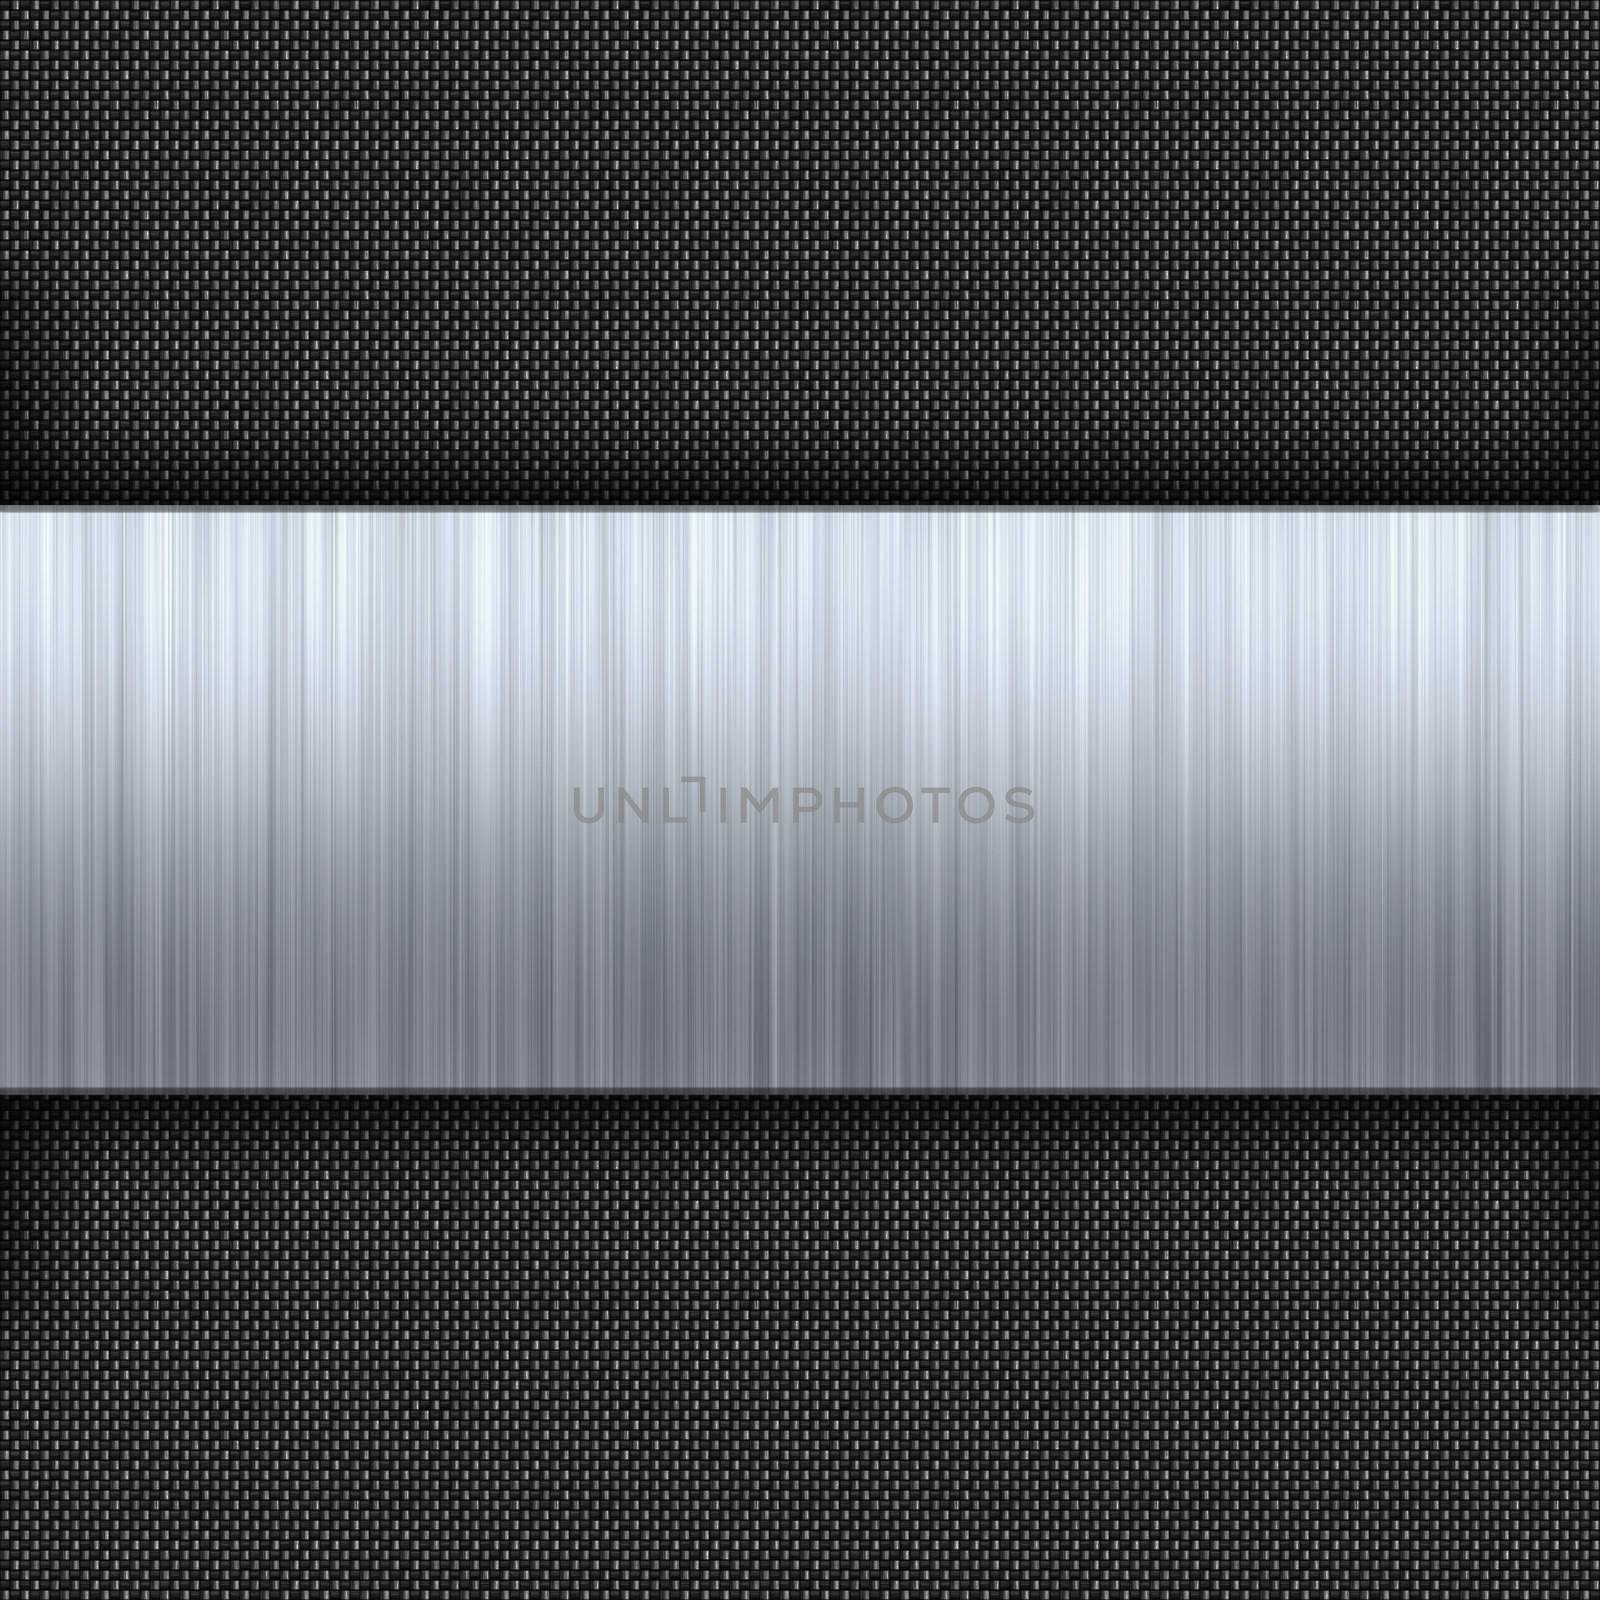 Carbon fiber background with a strip of embossed brushed aluminum.  Plenty of copyspace in this layout.